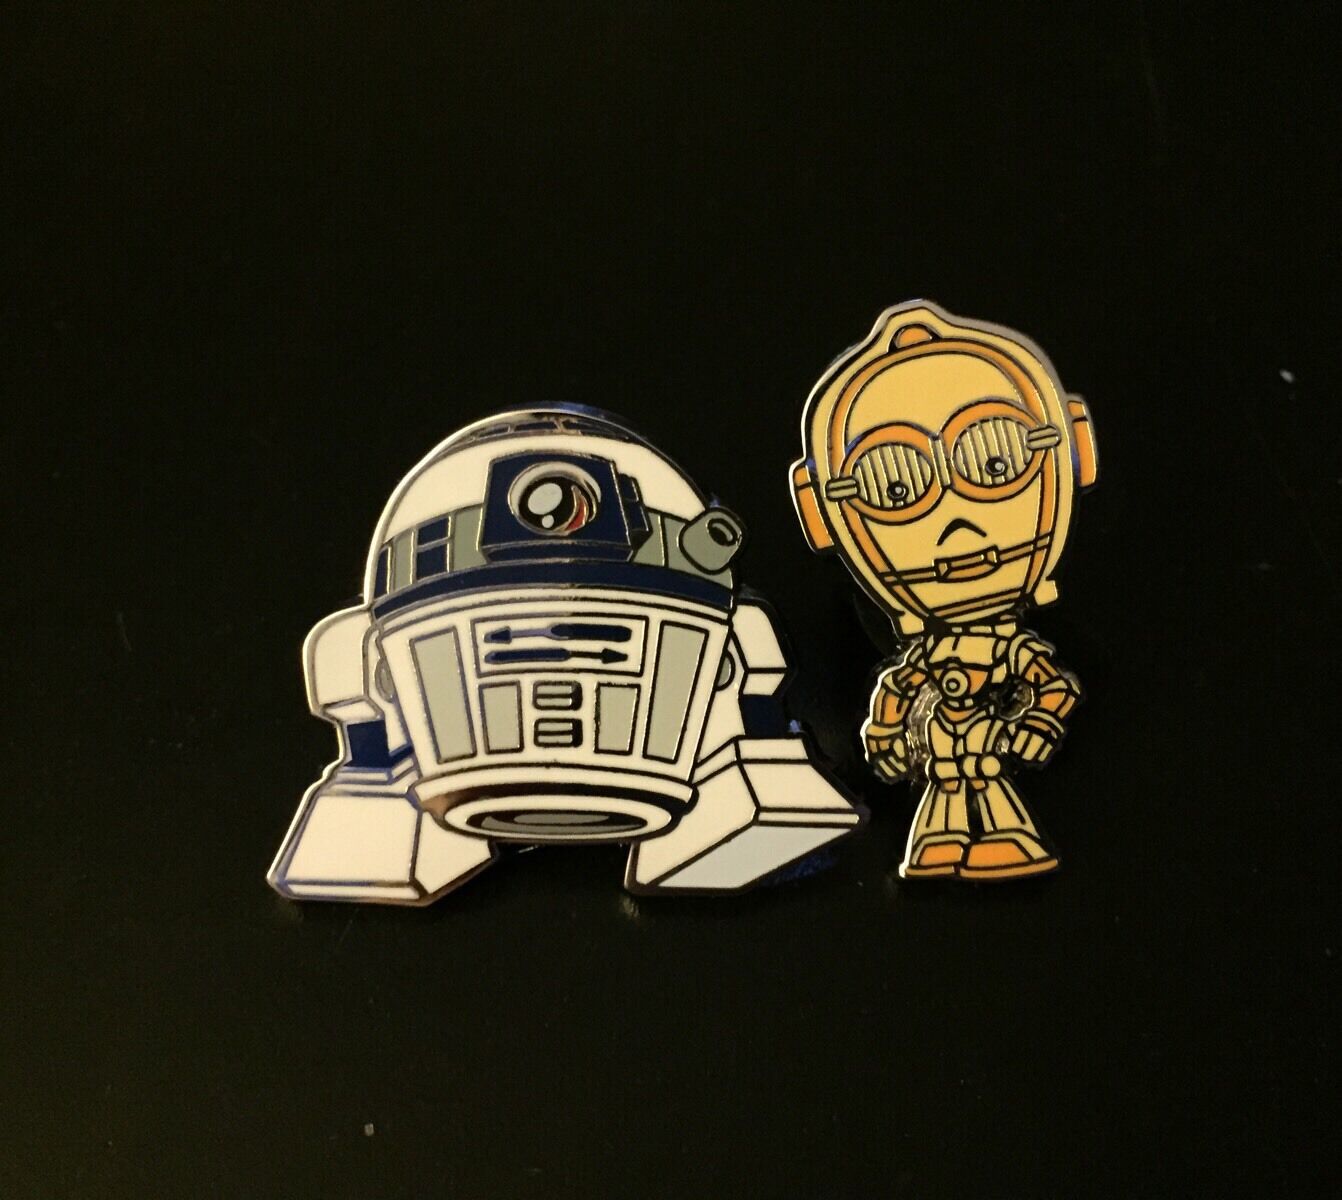 Star Wars C3-PO & R2-D2 Disney Pins From Mystery Pack NEW 2015 Droids (2 PINS)